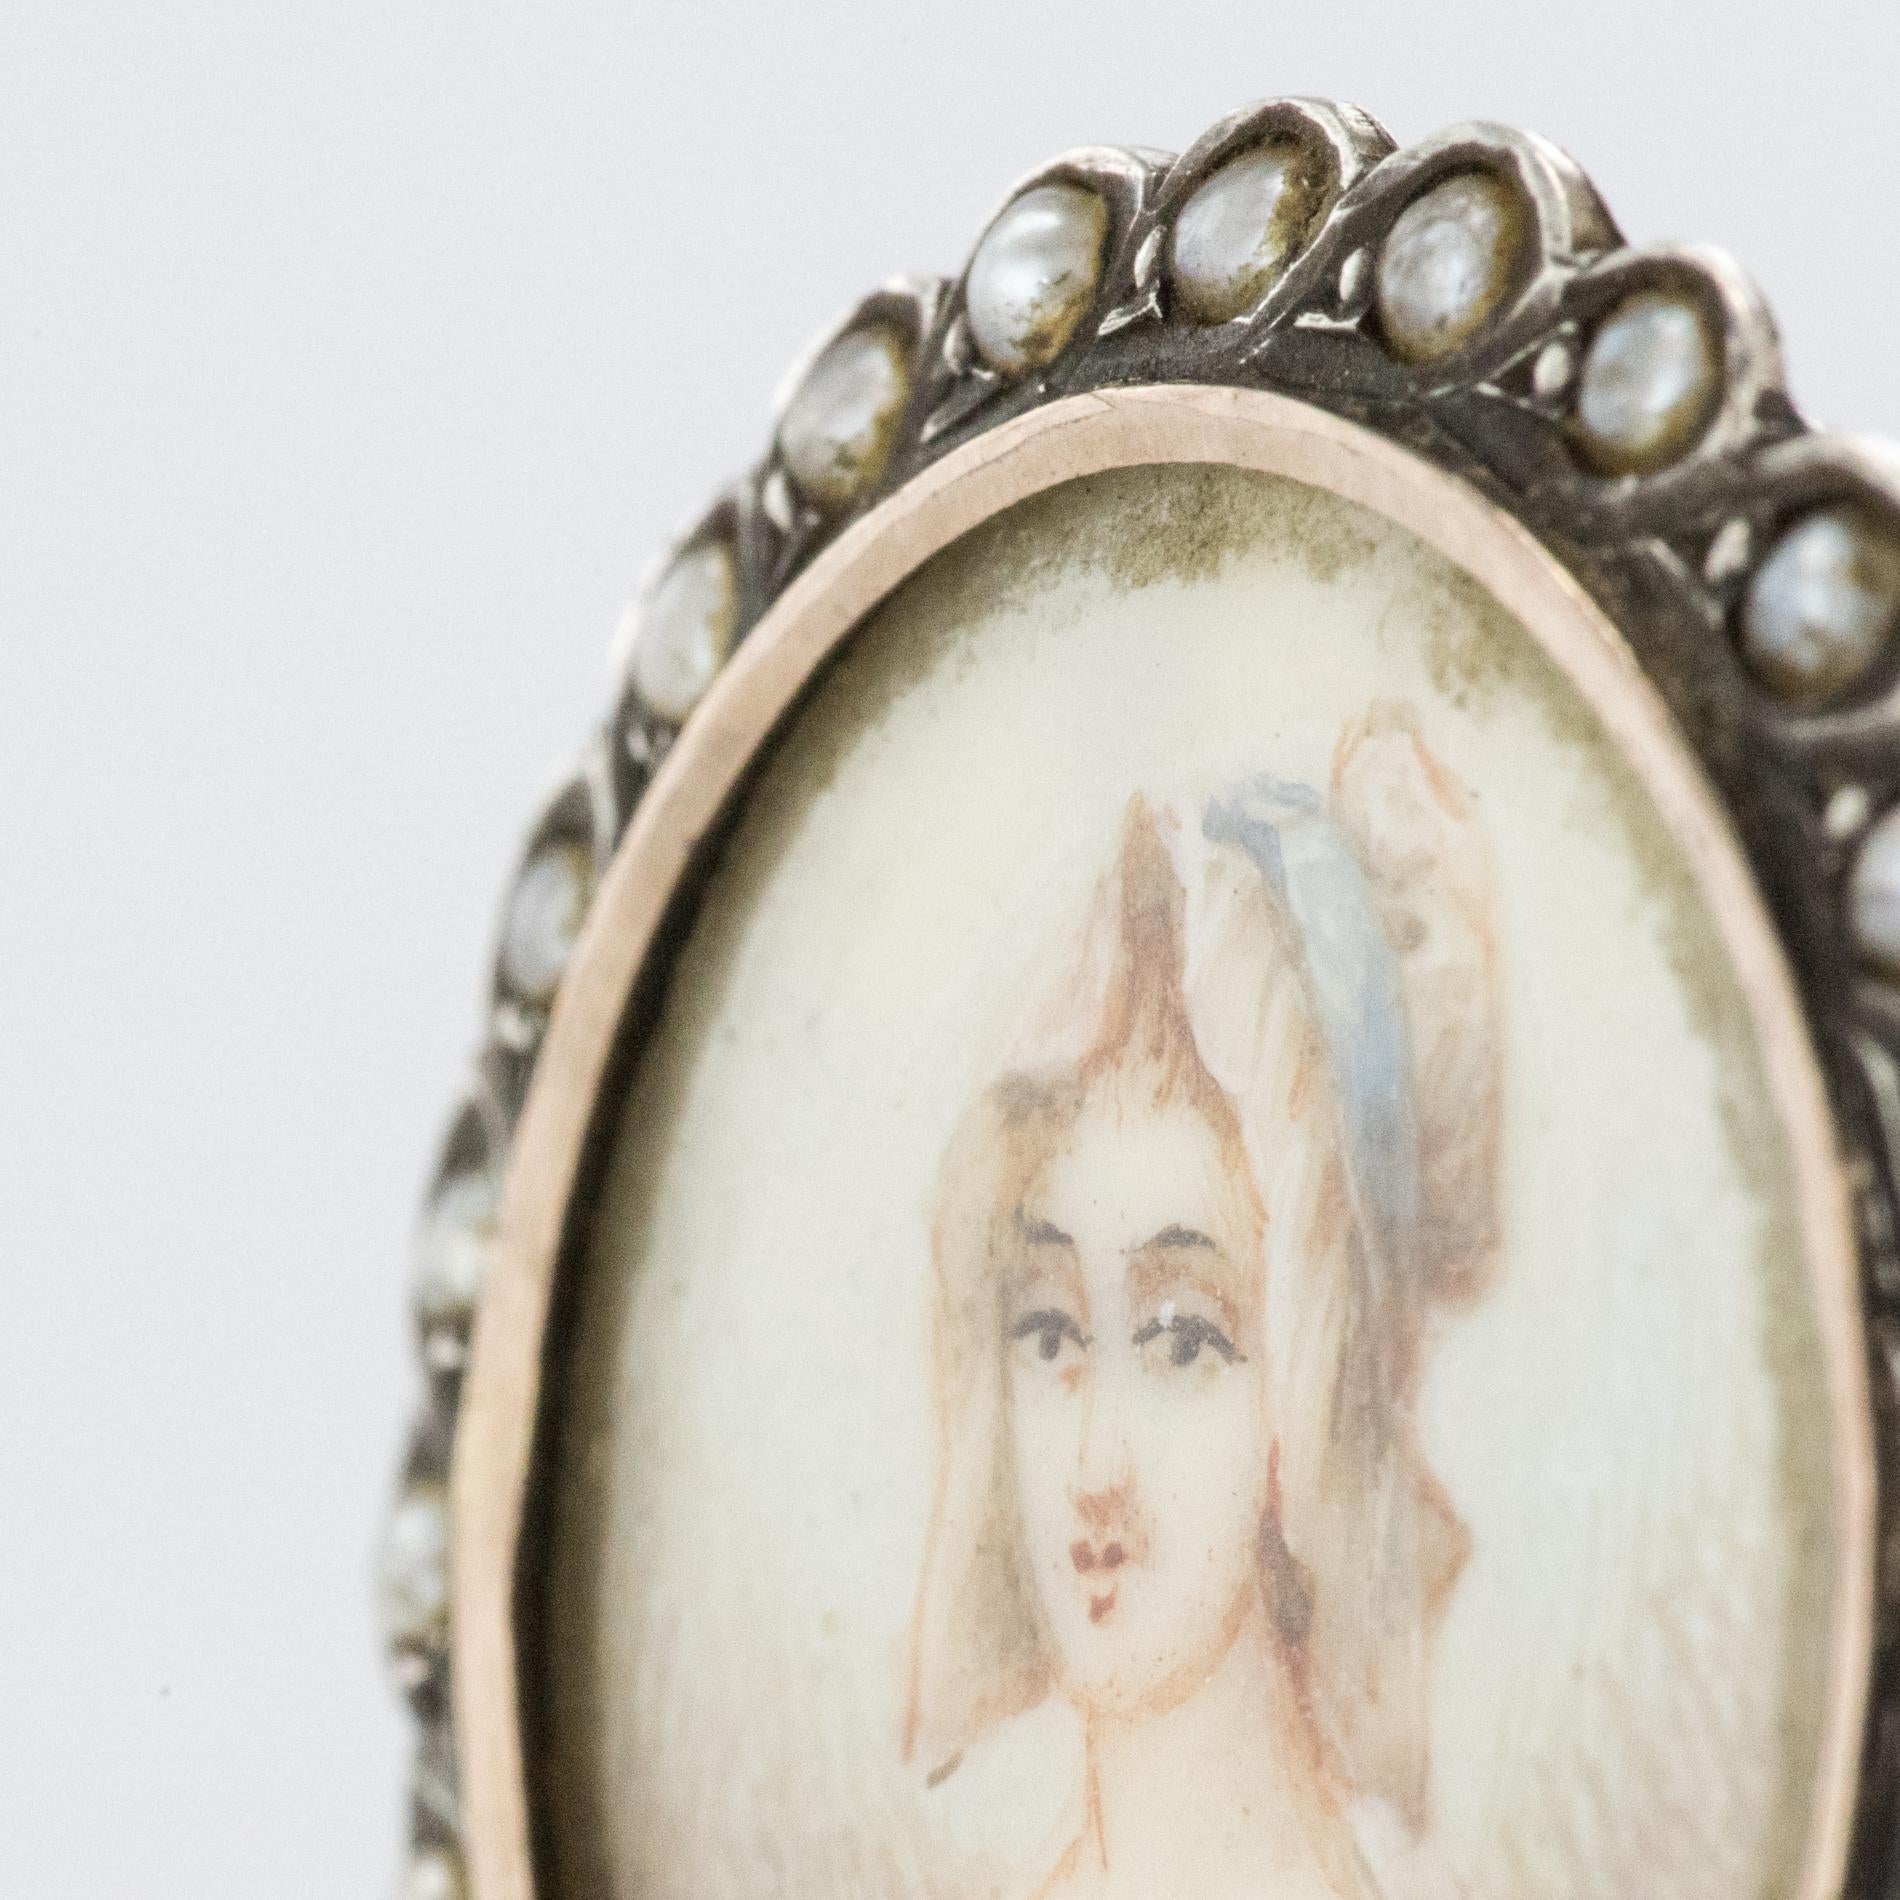 Napoleon III 19th Century Miniature and Pearls on Silver Brooch For Sale